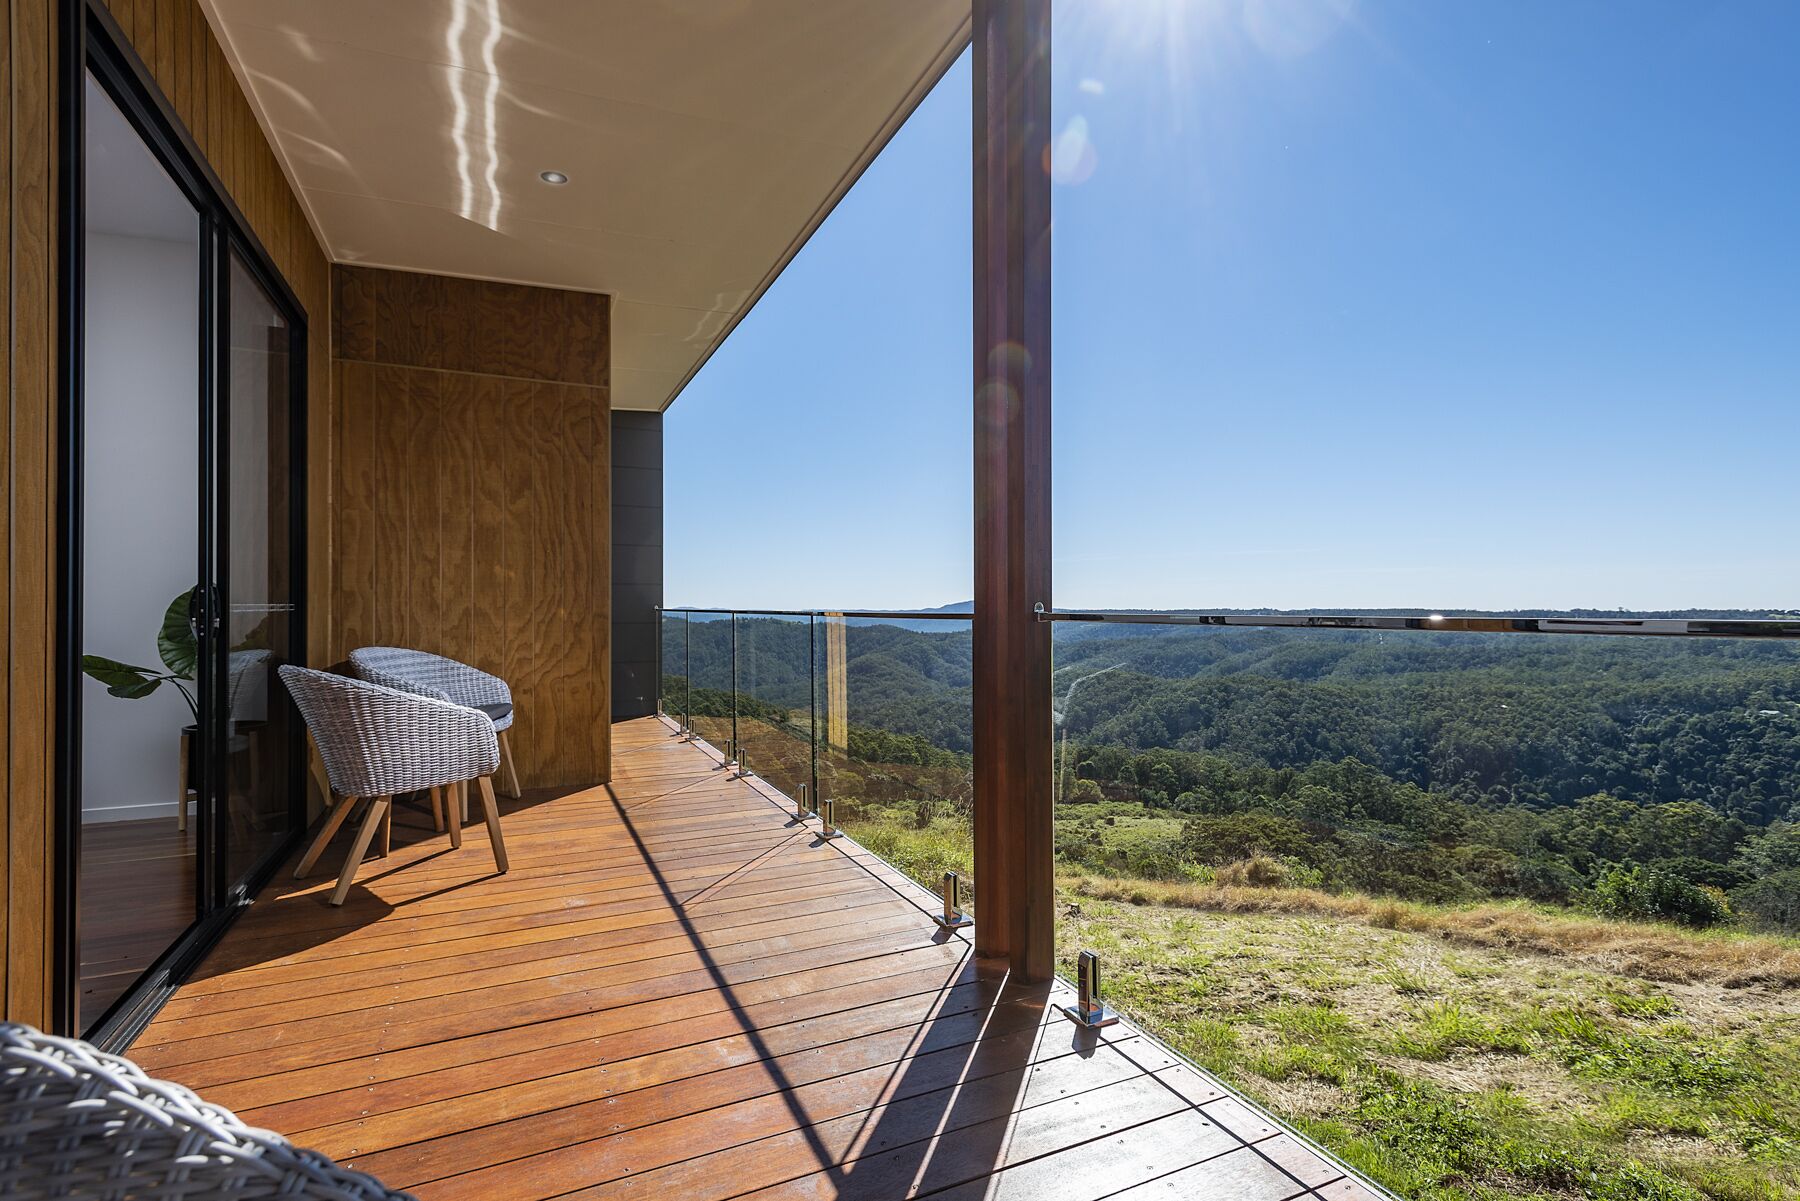 Luxury Cabins - Best Views in Maleny